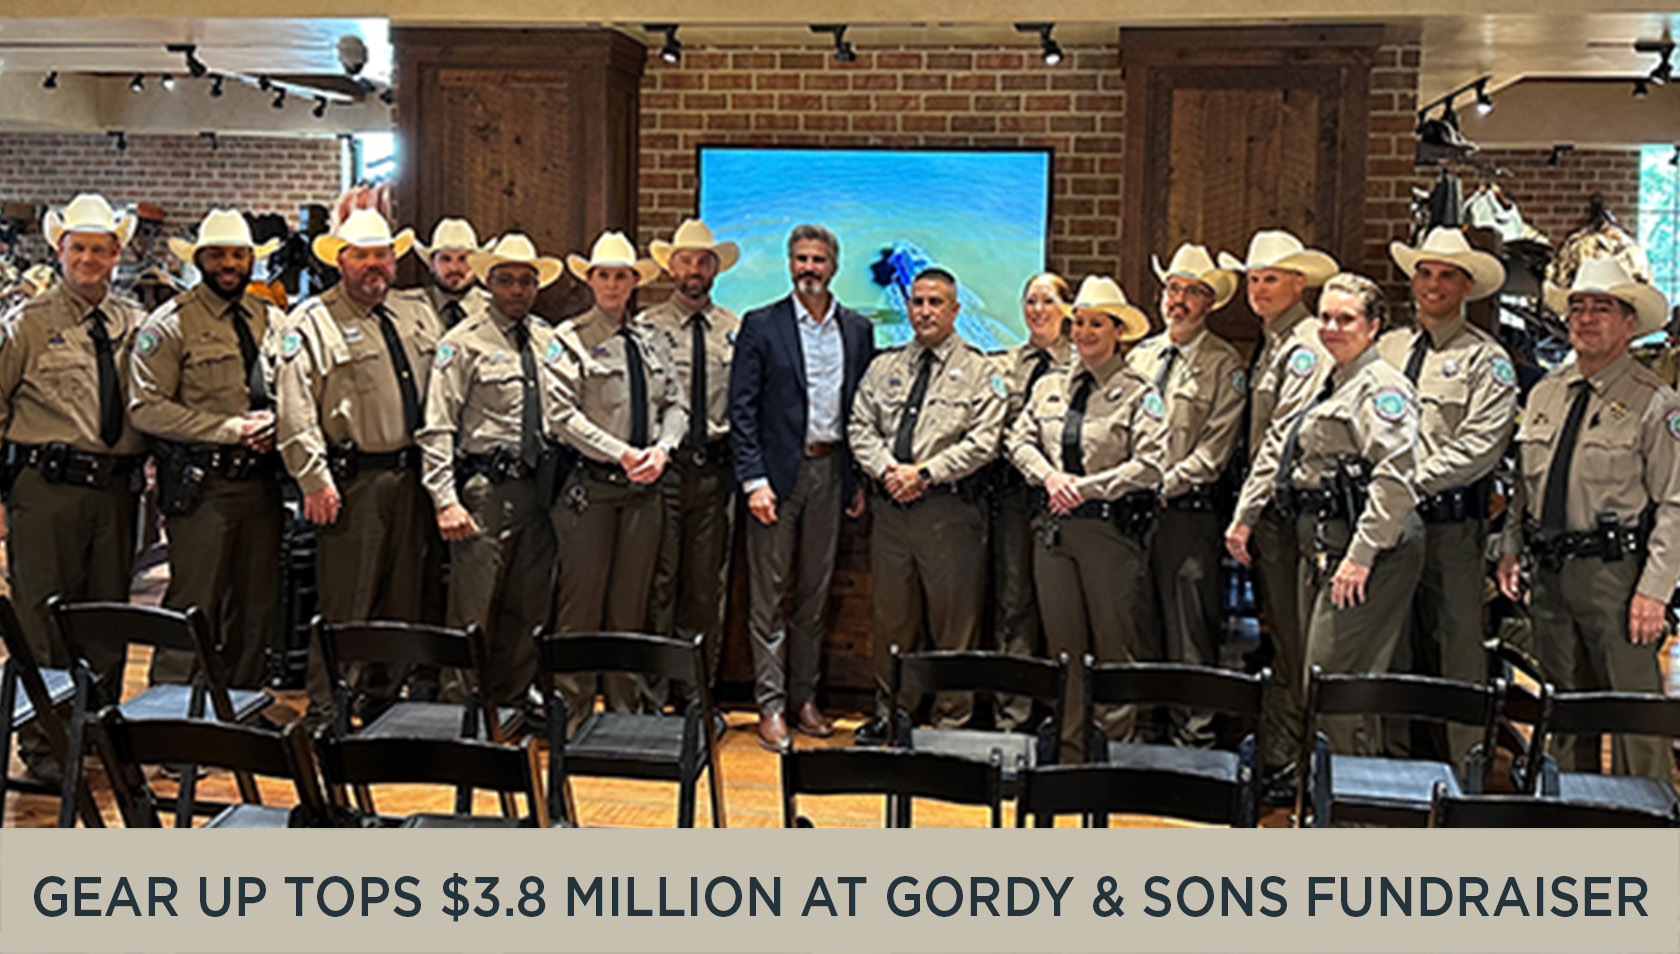 Story #2: Gear Up Tops $3.8 million with Gordy & Sons Fundraiser